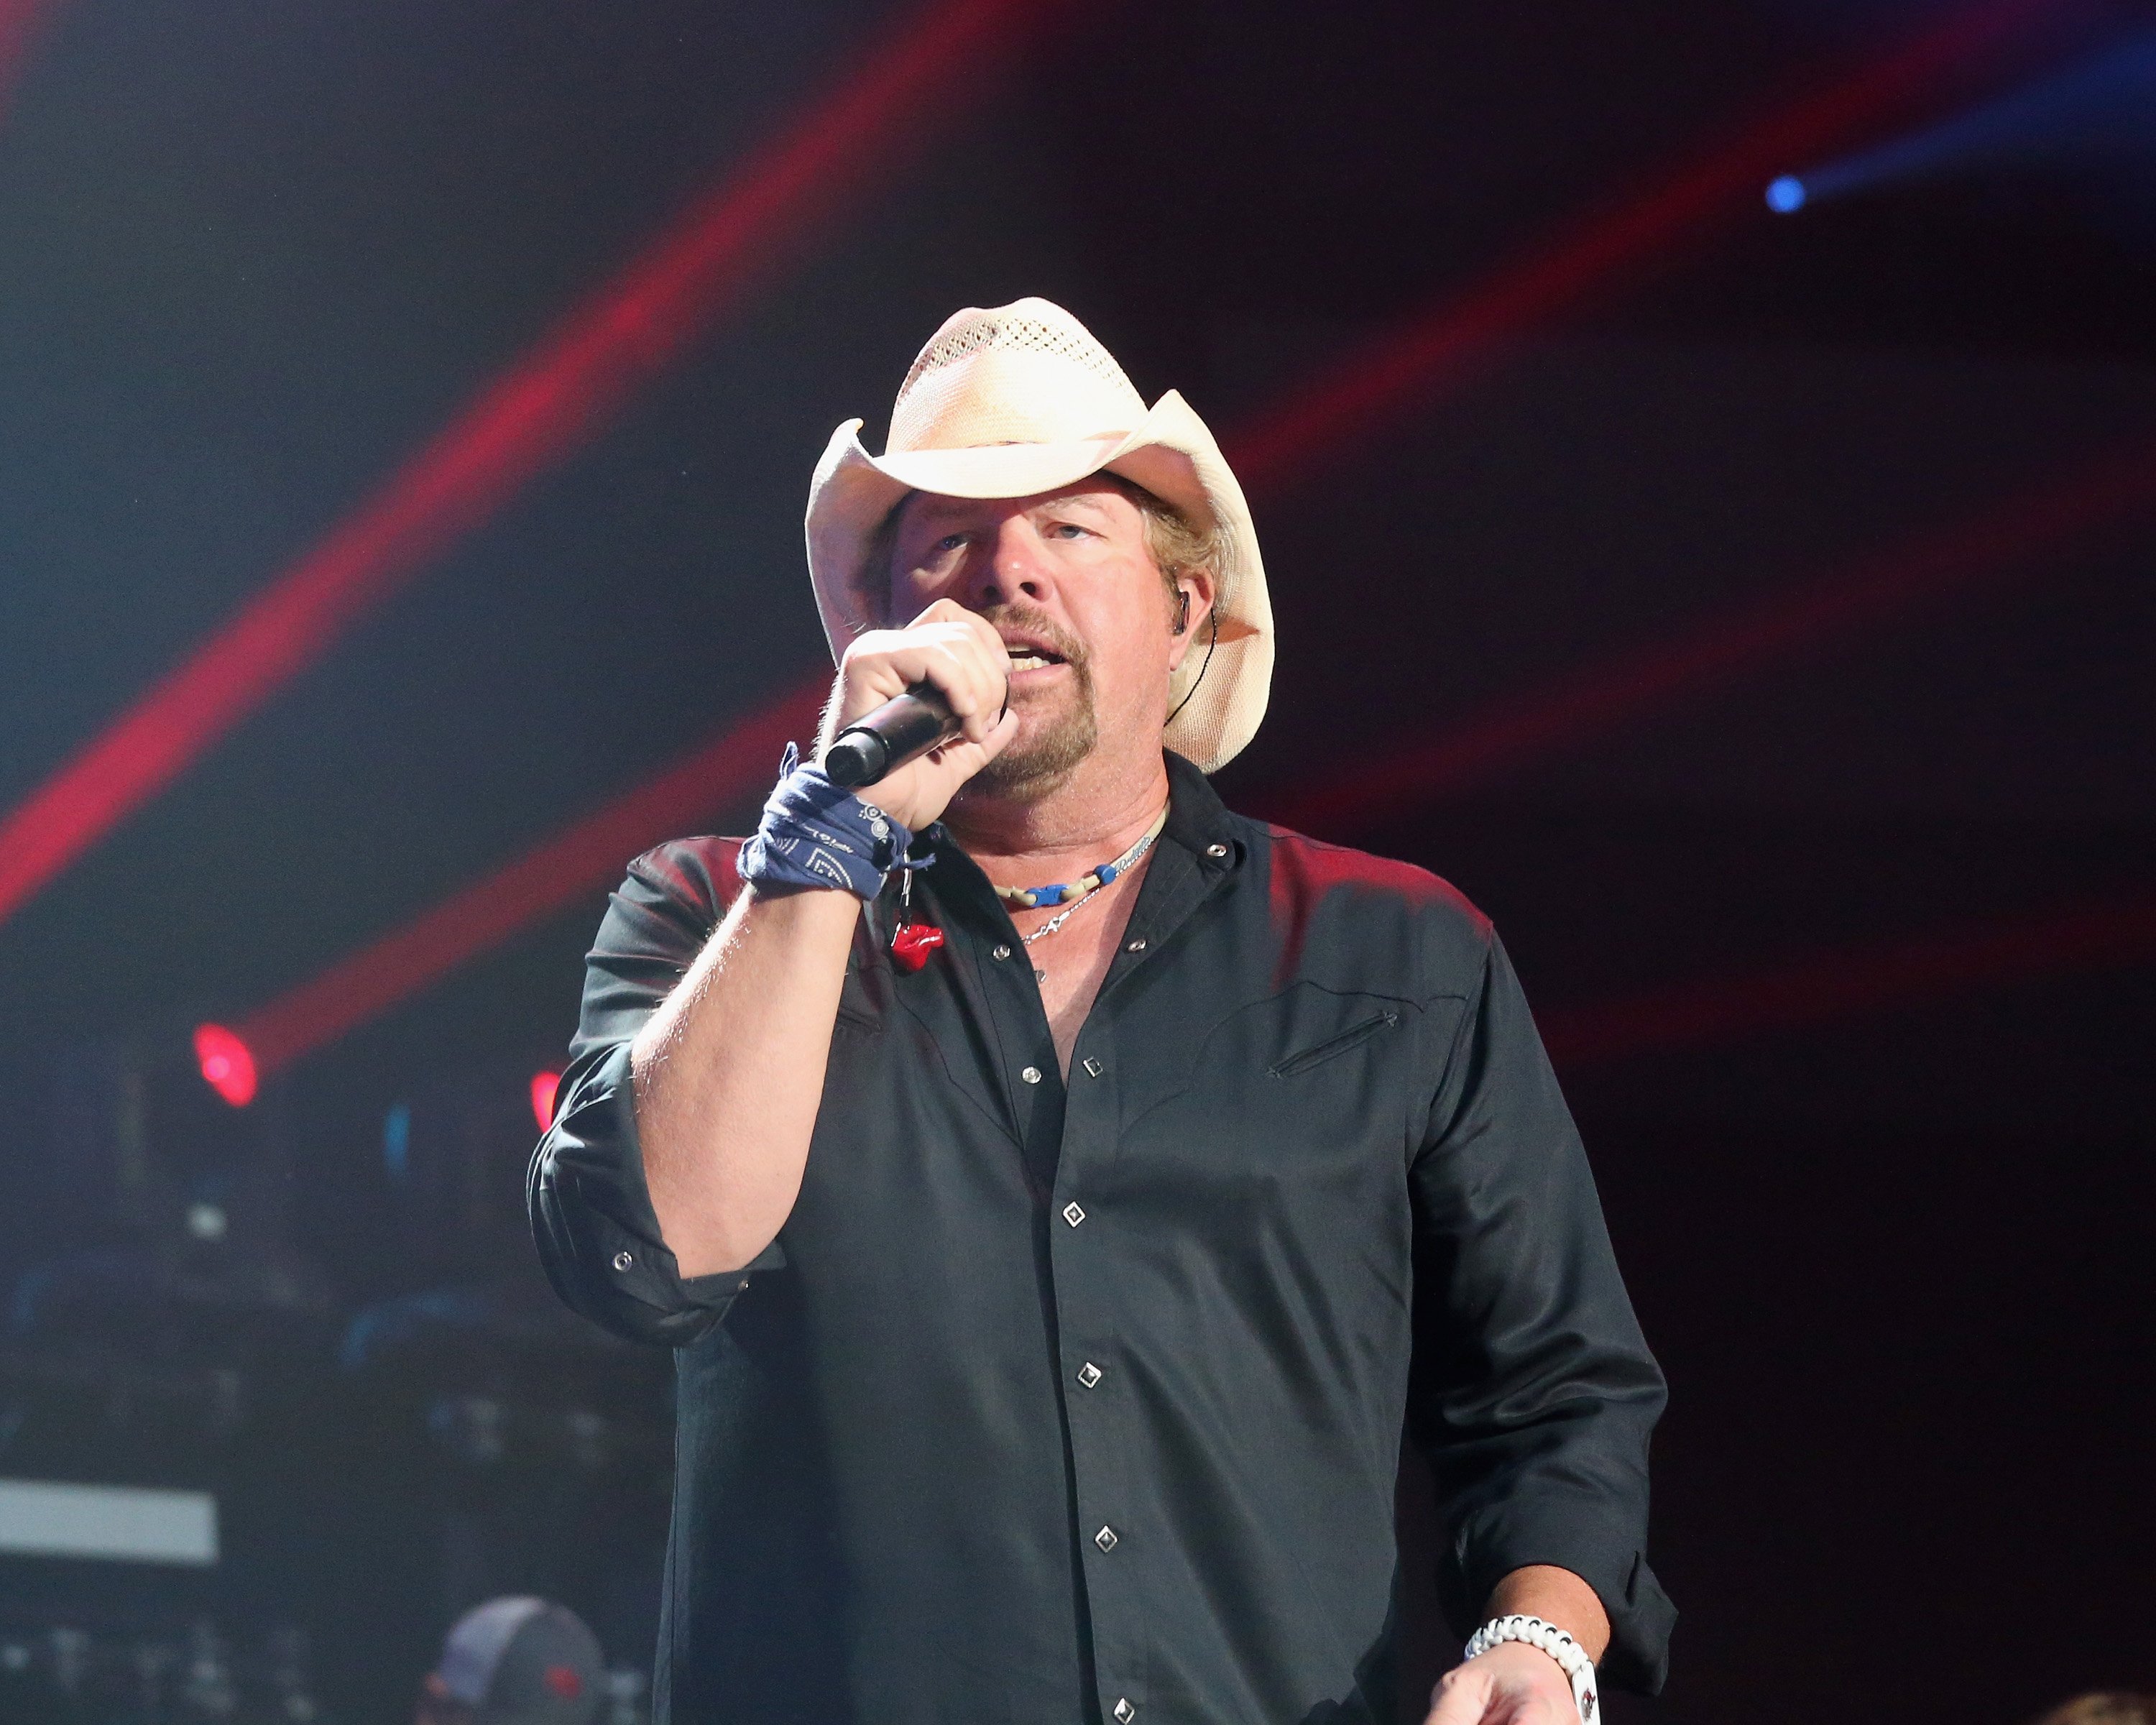 Toby Keith performs in a concert celebrating the tenth anniversary of the HEB Center on September 6, 2019, in Cedar Park, Texas. | Source: Getty Images